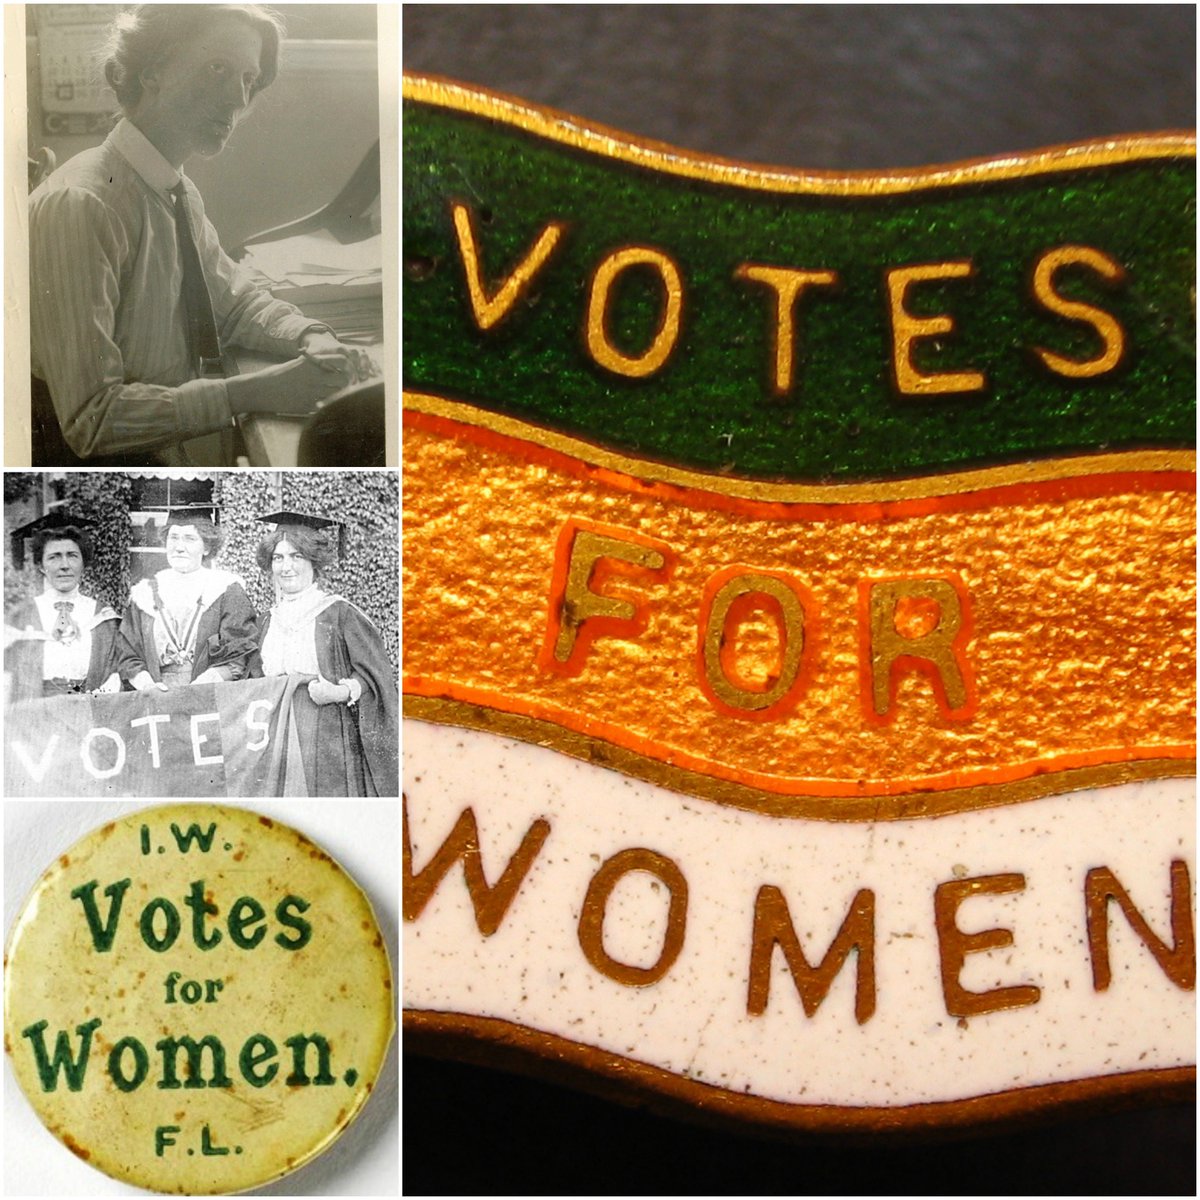 Curated by #CorkCountyLibrary's #LocalStudies team, 'Making their mark: #Women’s Road to #Franchise', is a fantastic exhibition detailing the background to the #suffrage movement in #Ireland & Britain.
On display at #CobhLibrary til Sat. 12th January, it's a must see! 
#votail100